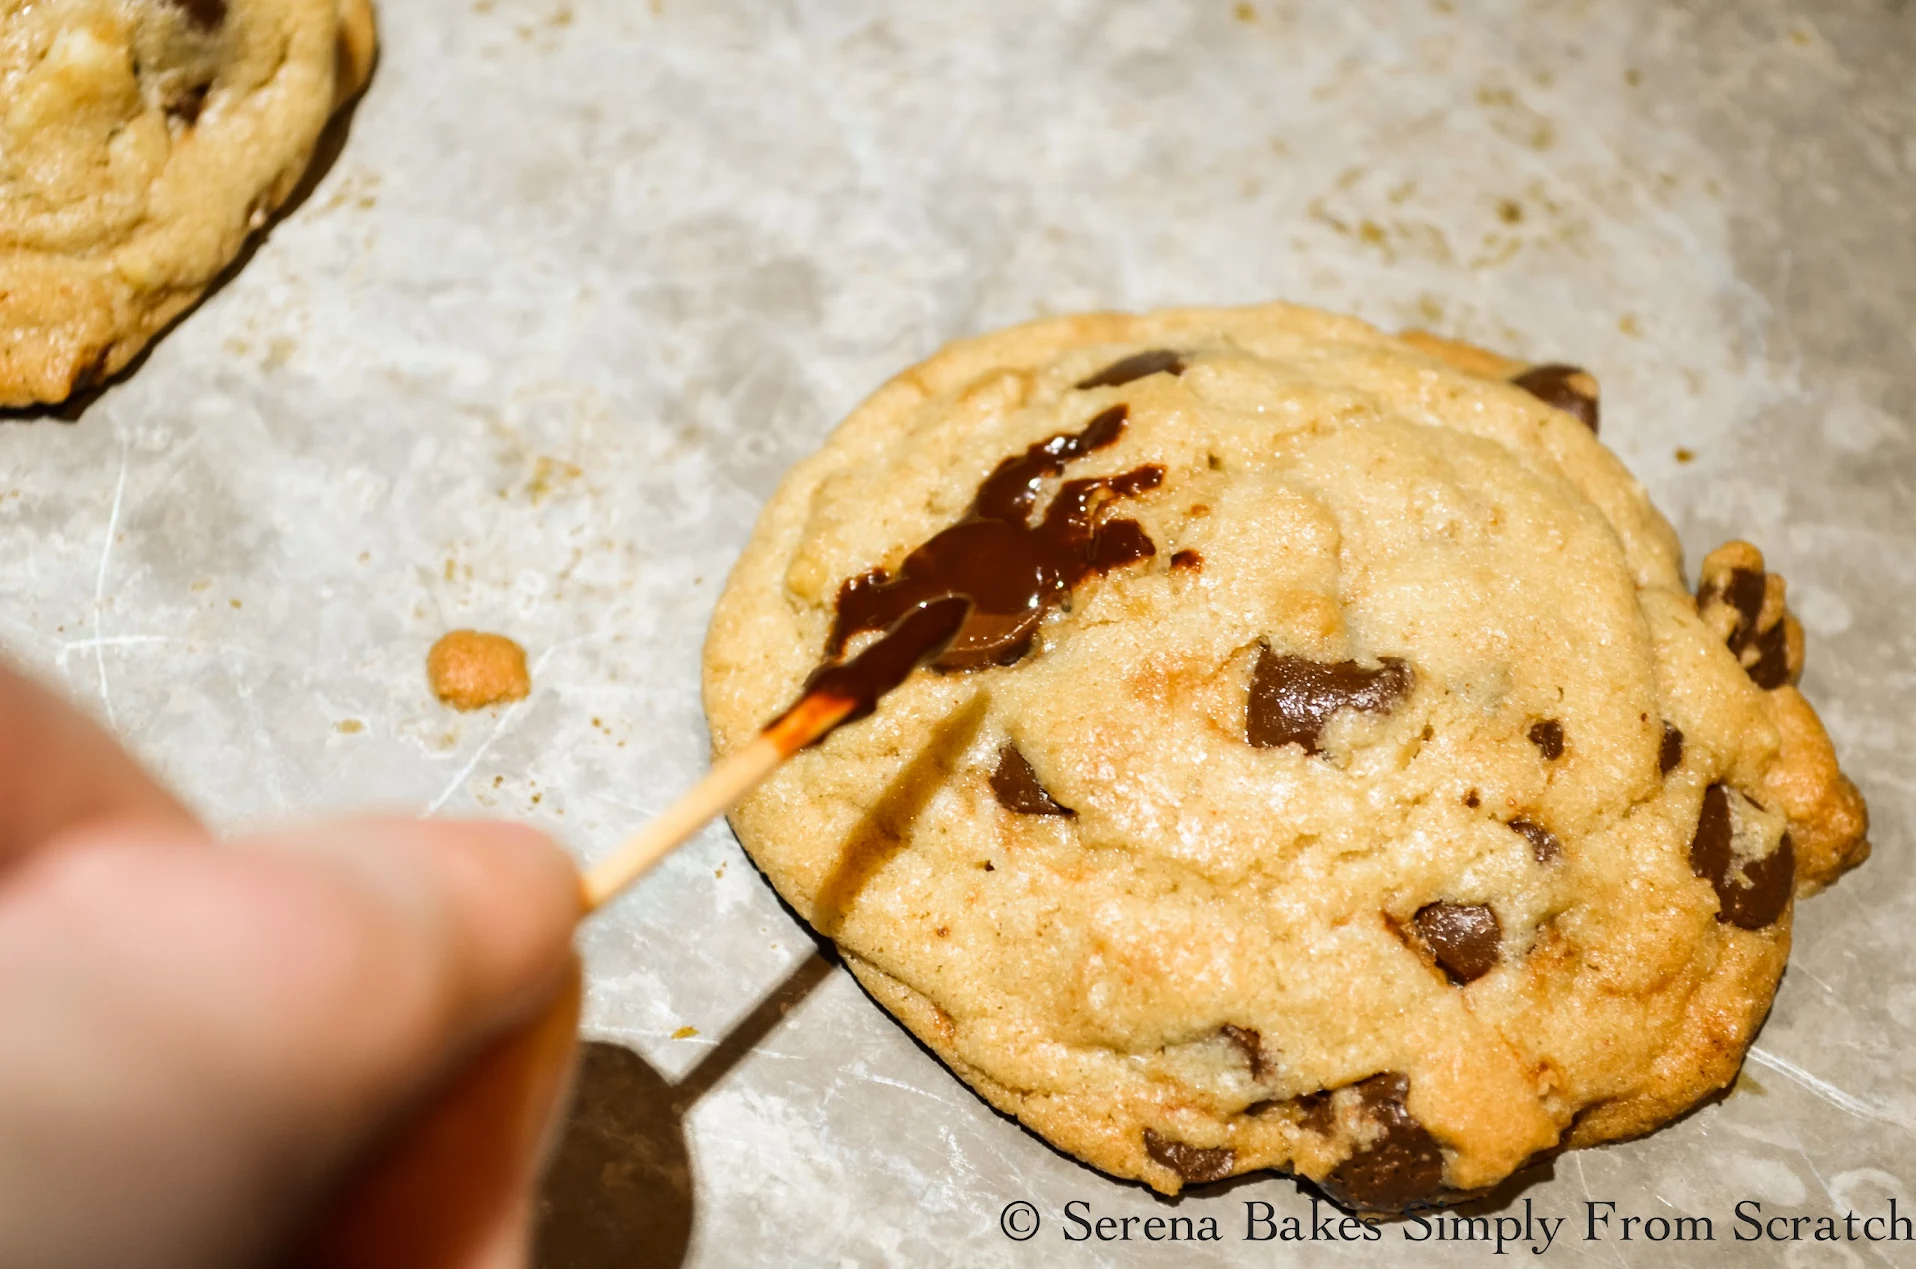 Use a toothpick to draw on legs for Spider Chocolate Chip Cookies.